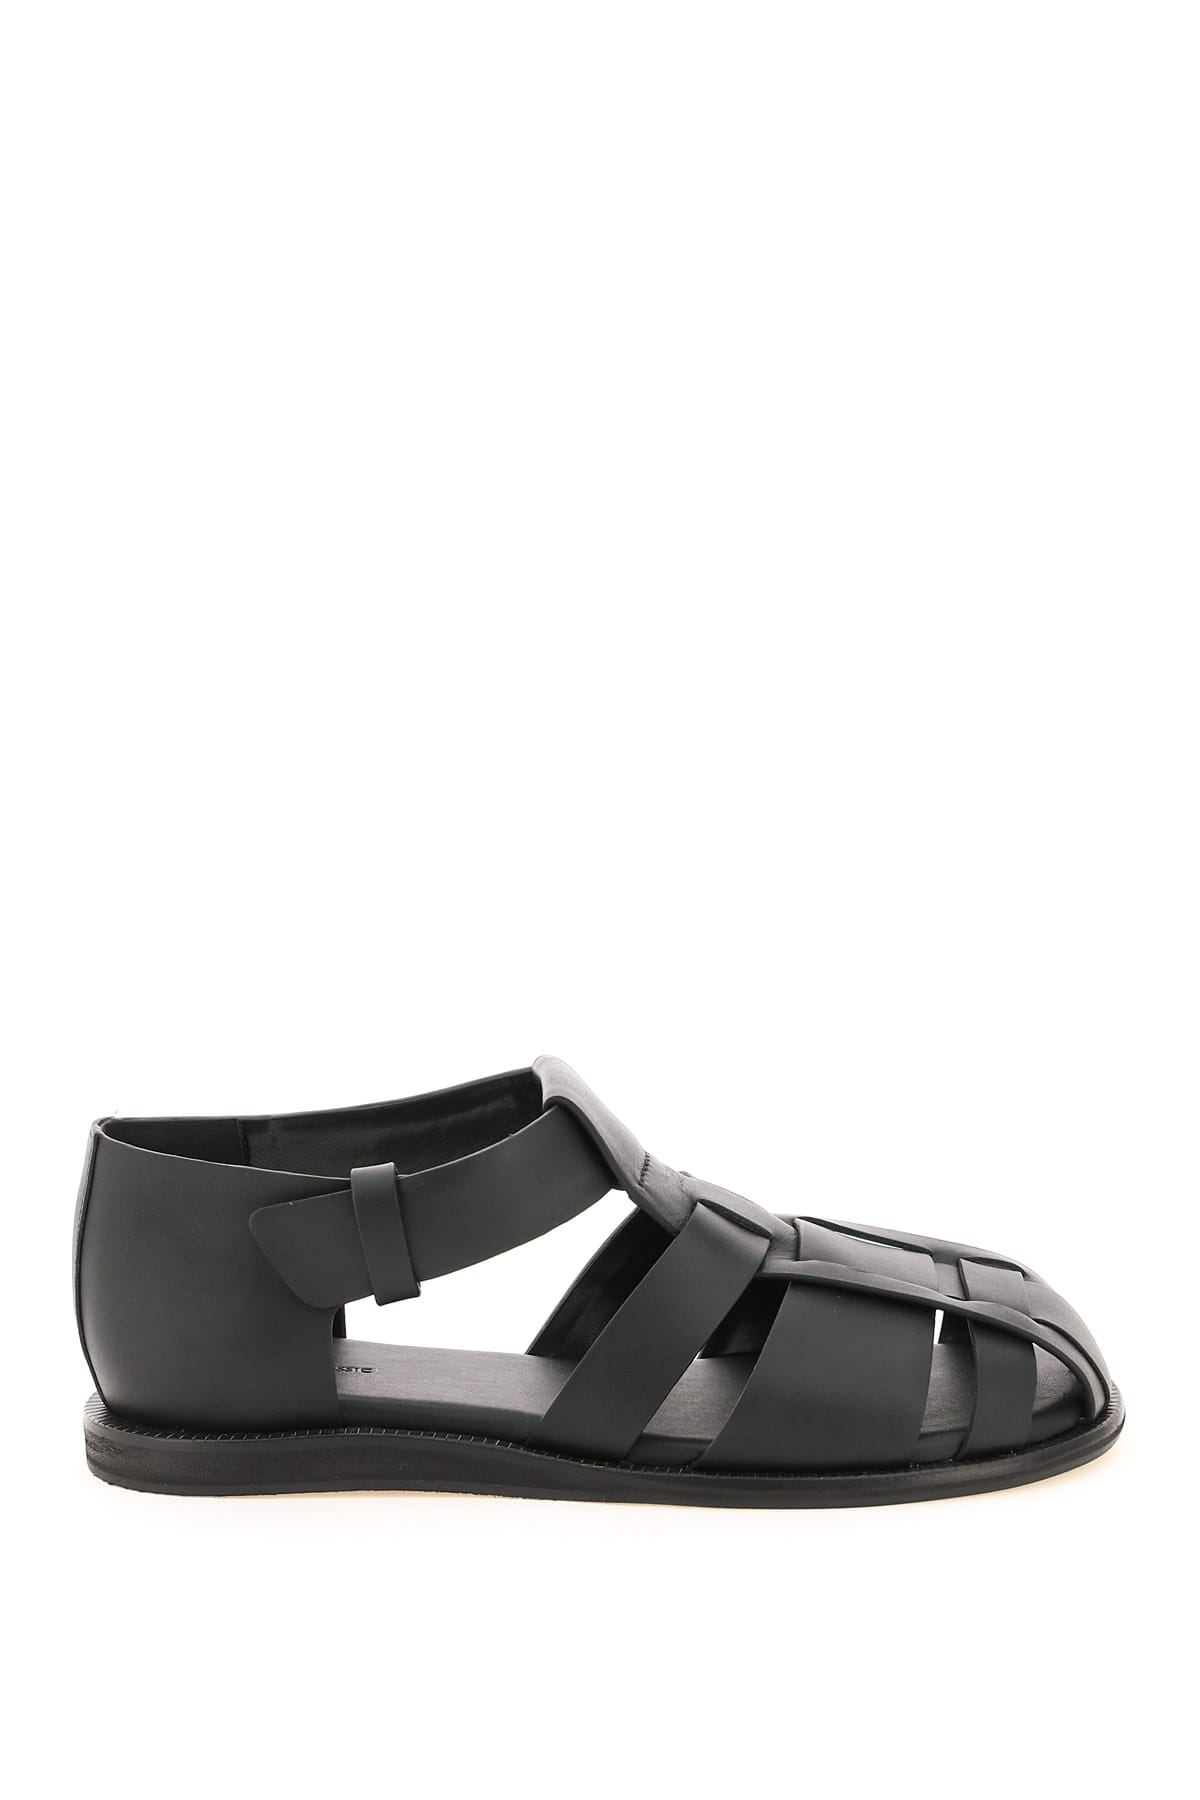 Low Classic Gladiator Leather Sandal